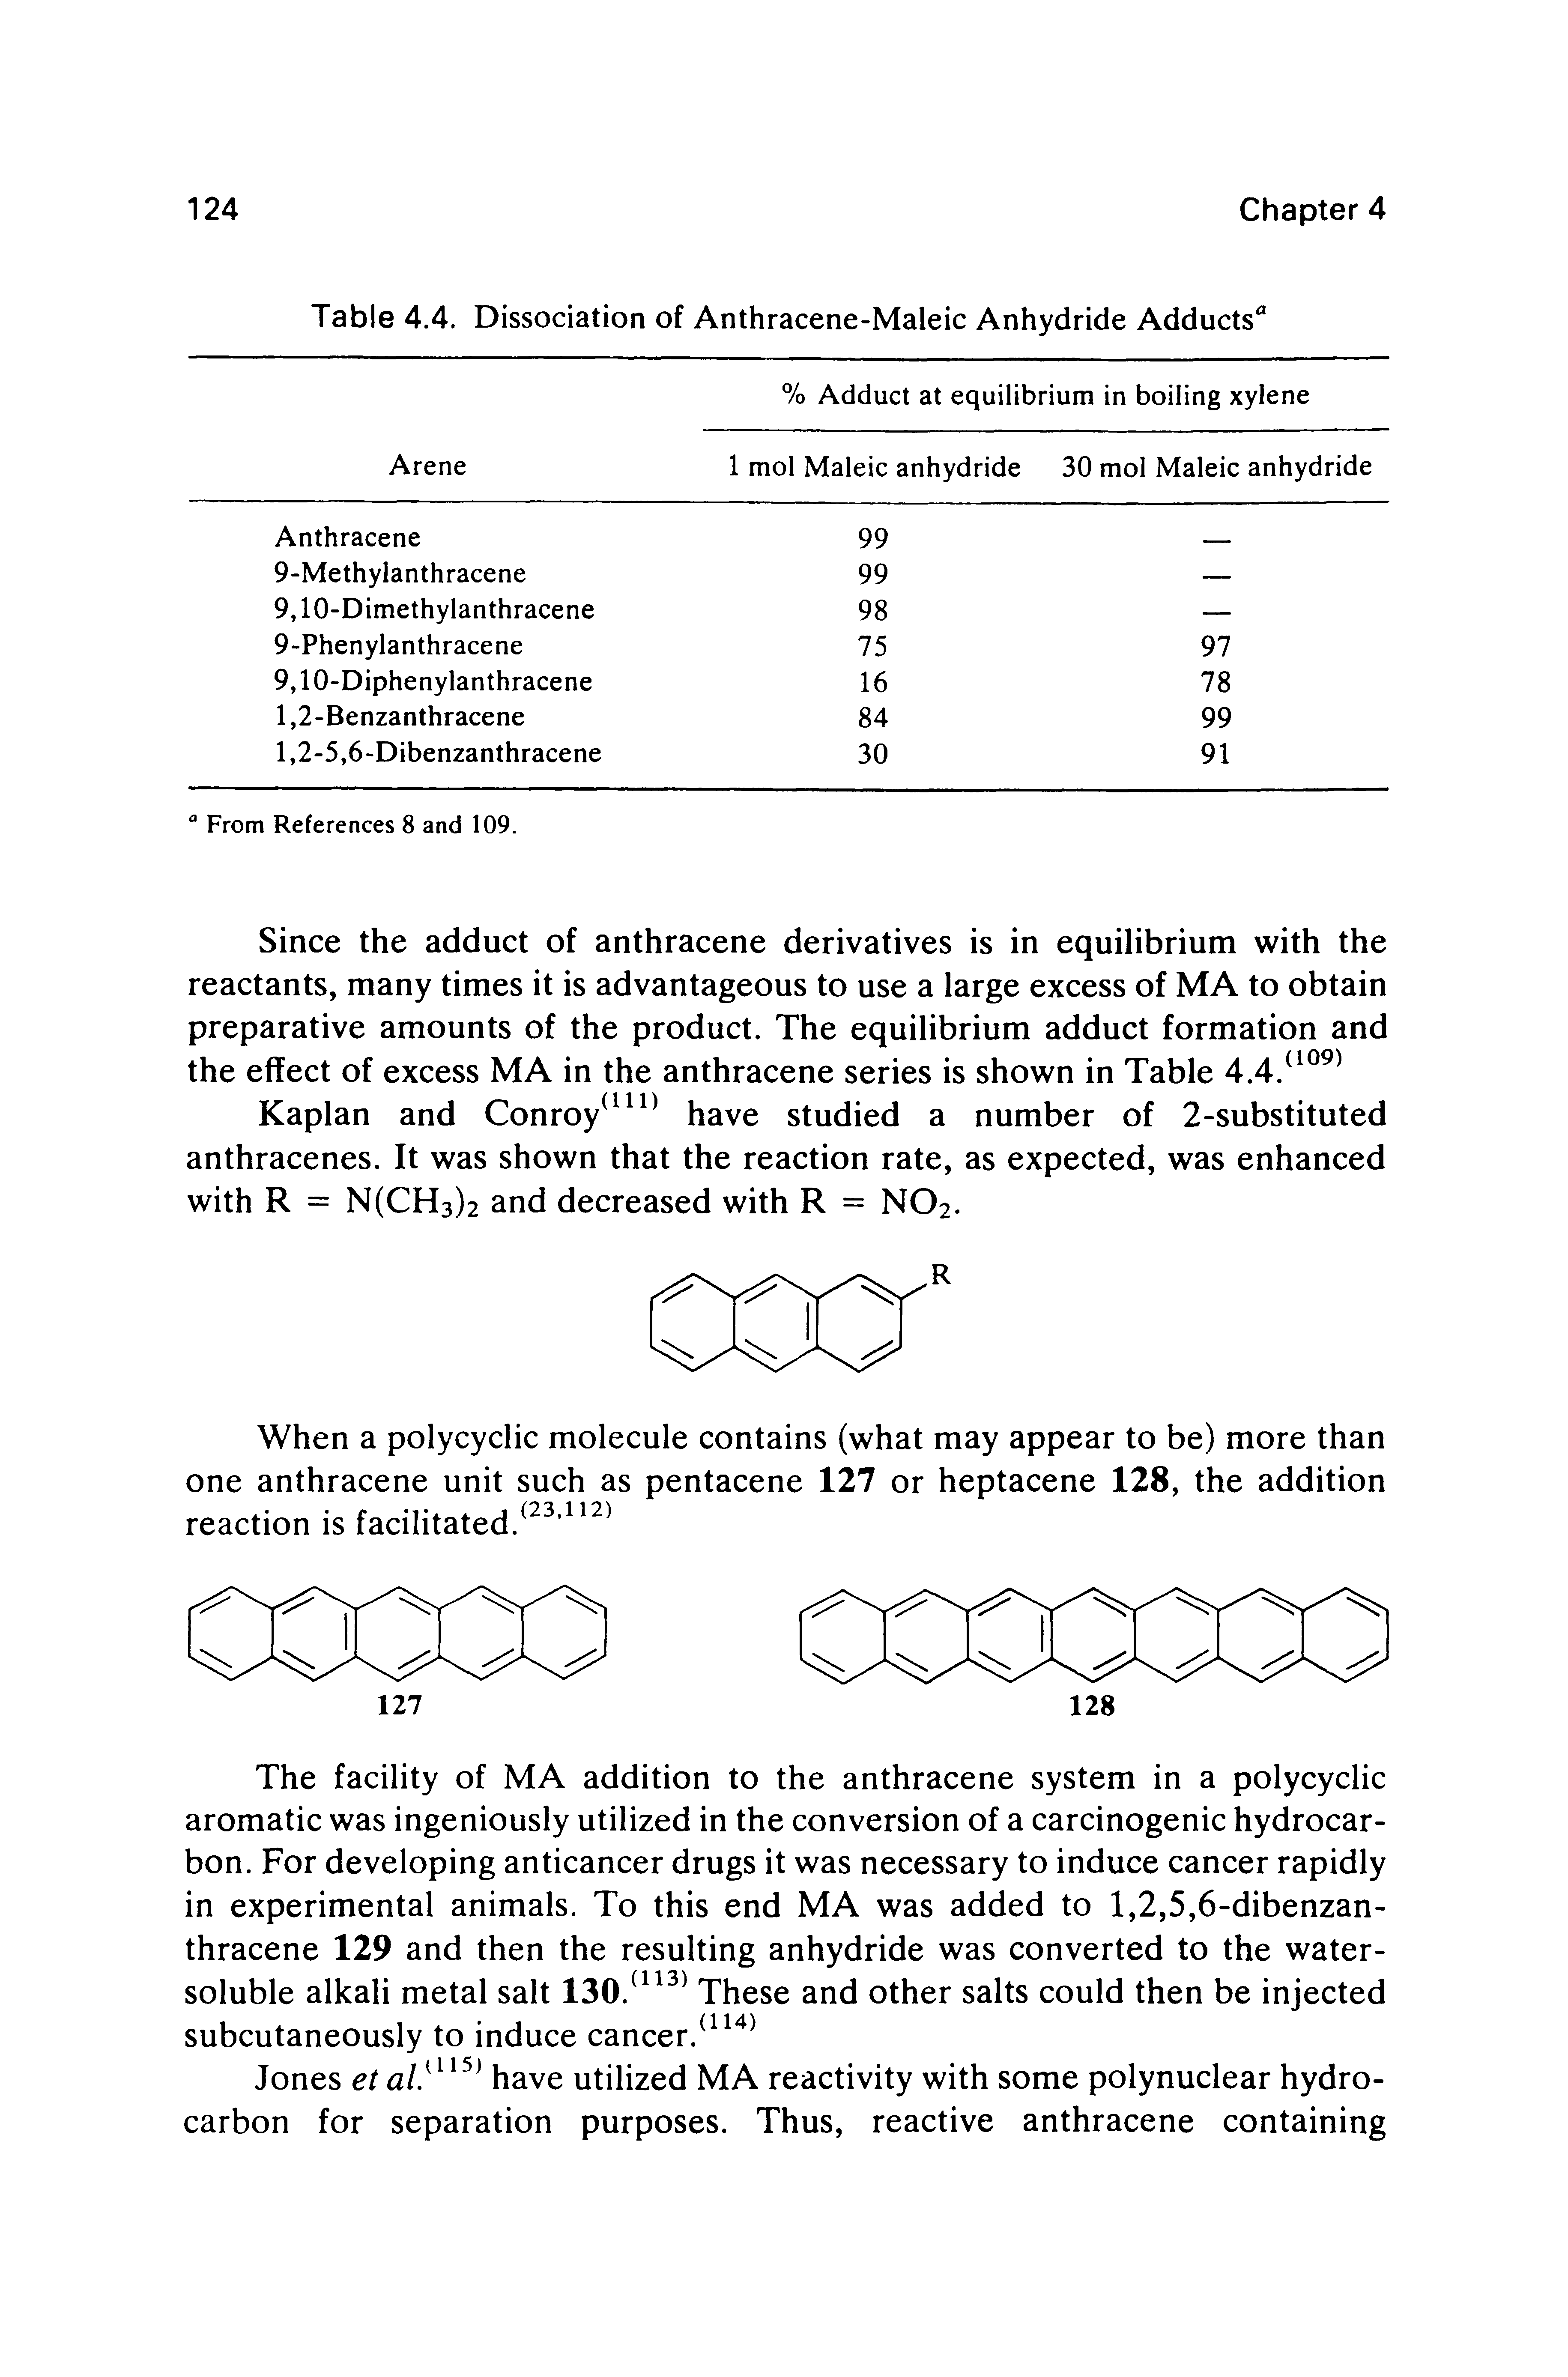 Table 4.4. Dissociation of Anthracene-Maleic Anhydride Adducts ...